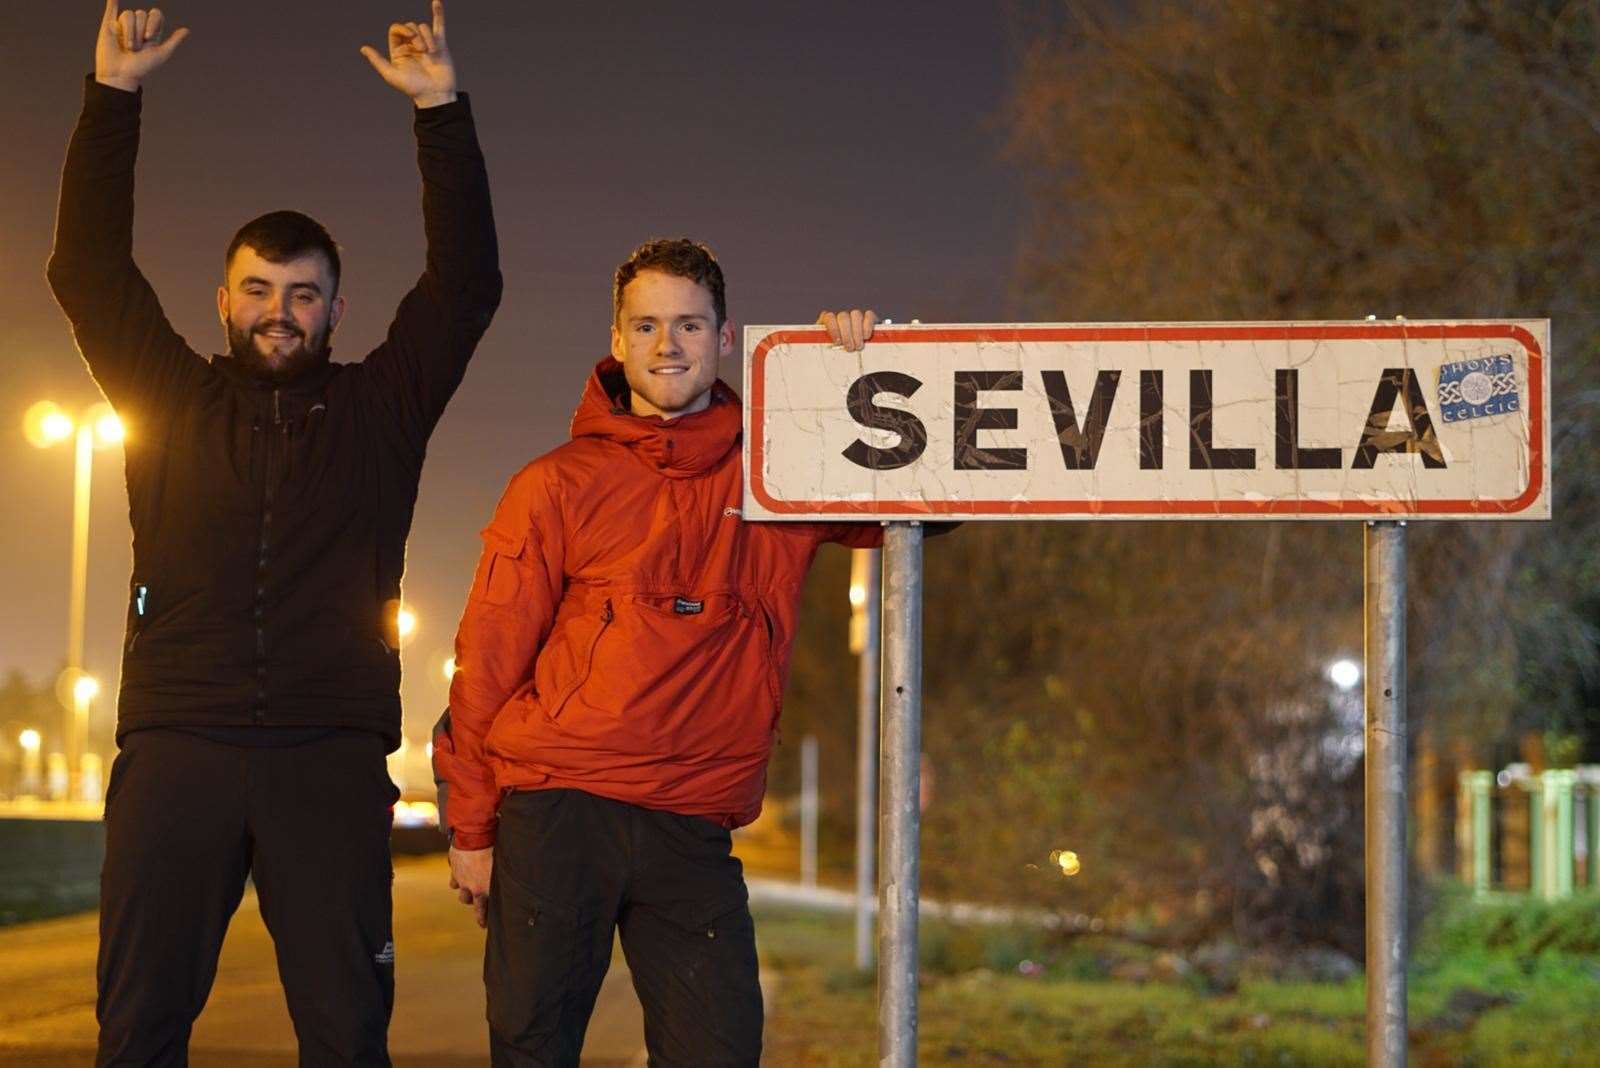 From Edinburgh to Seville for Inverness charity SNAP.